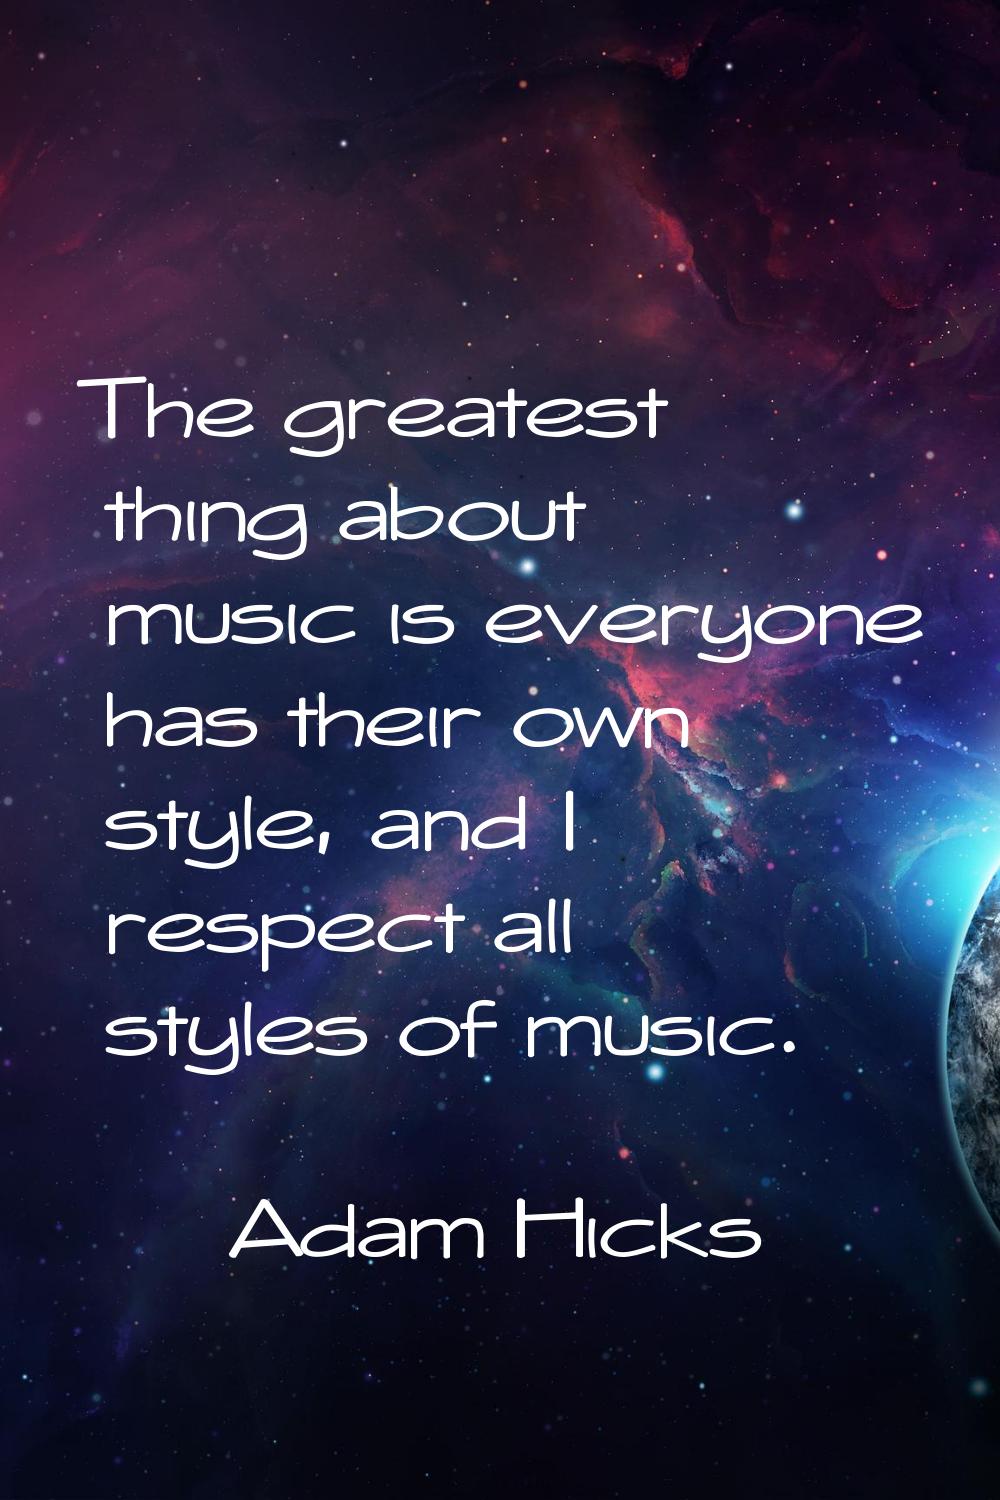 The greatest thing about music is everyone has their own style, and I respect all styles of music.